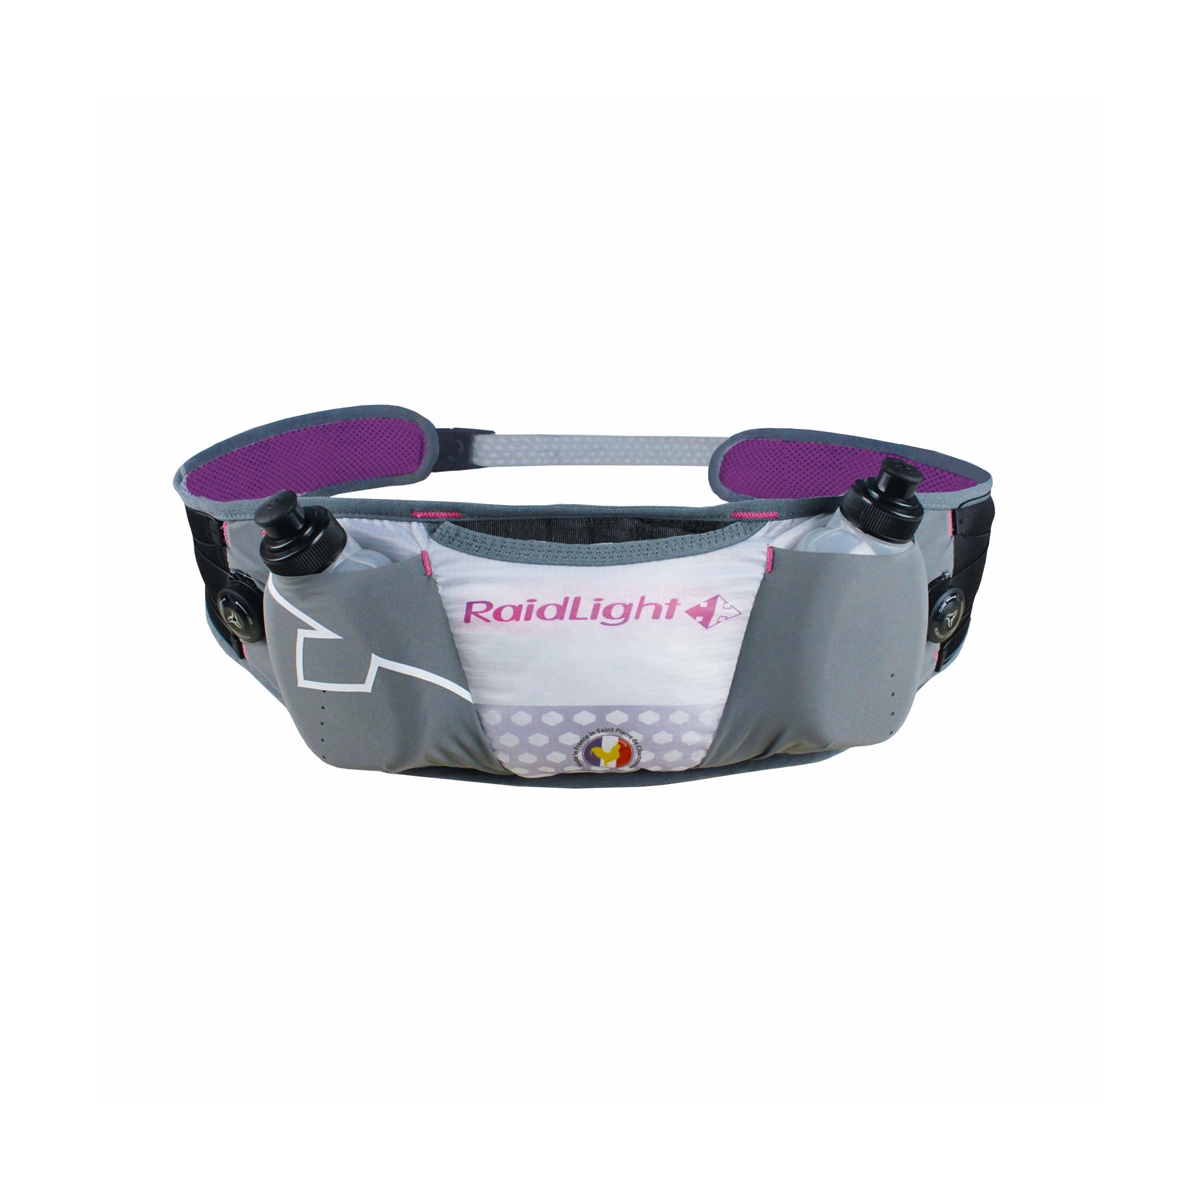 Ceinture lazerdry lady - made in france